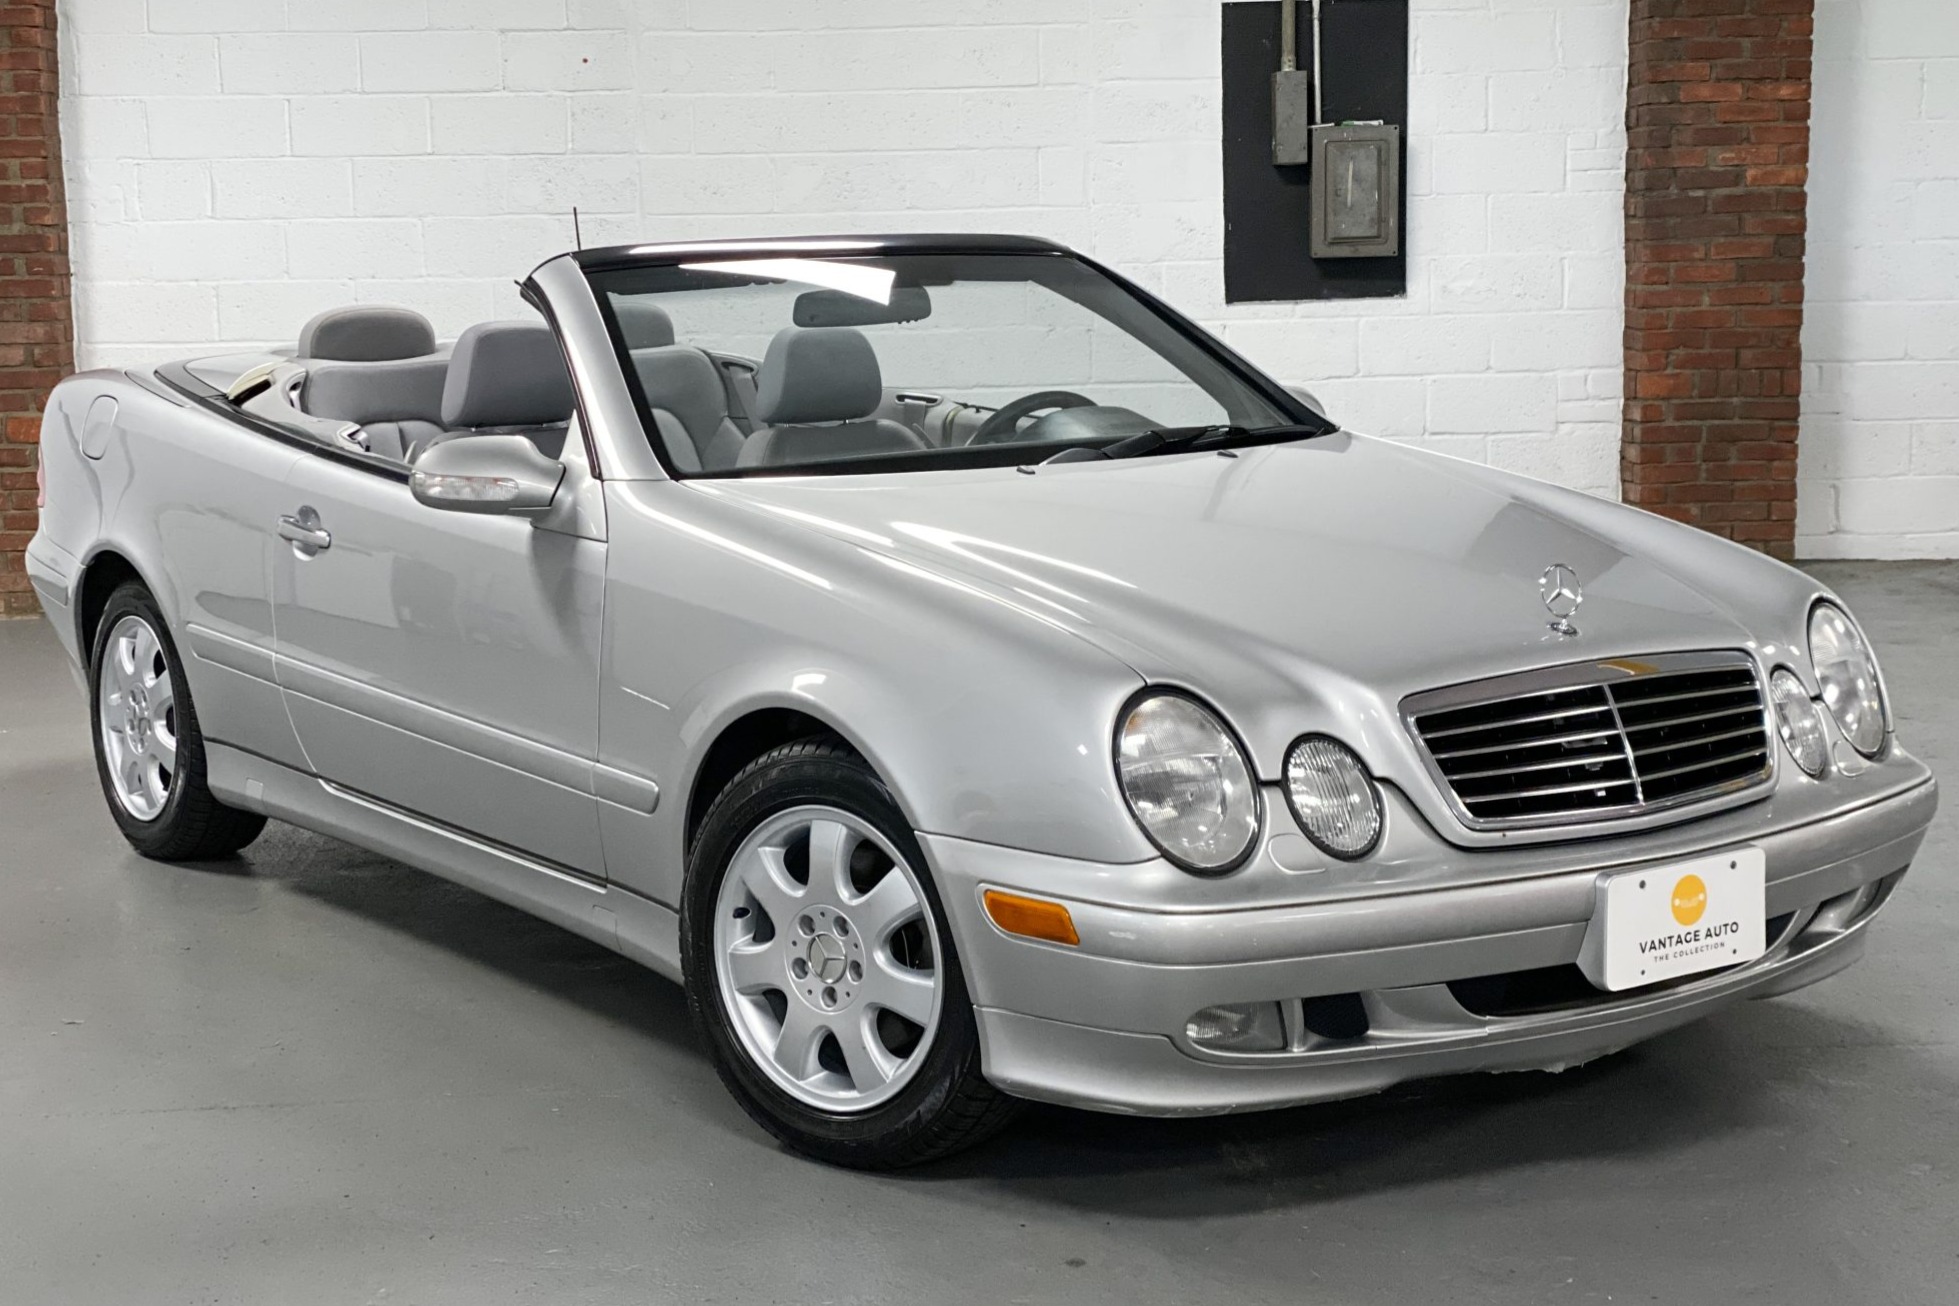 No Reserve: 2003 Mercedes-Benz CLK320 Convertible for sale on BaT Auctions  - sold for $13,750 on June 4, 2022 (Lot #75,286) | Bring a Trailer